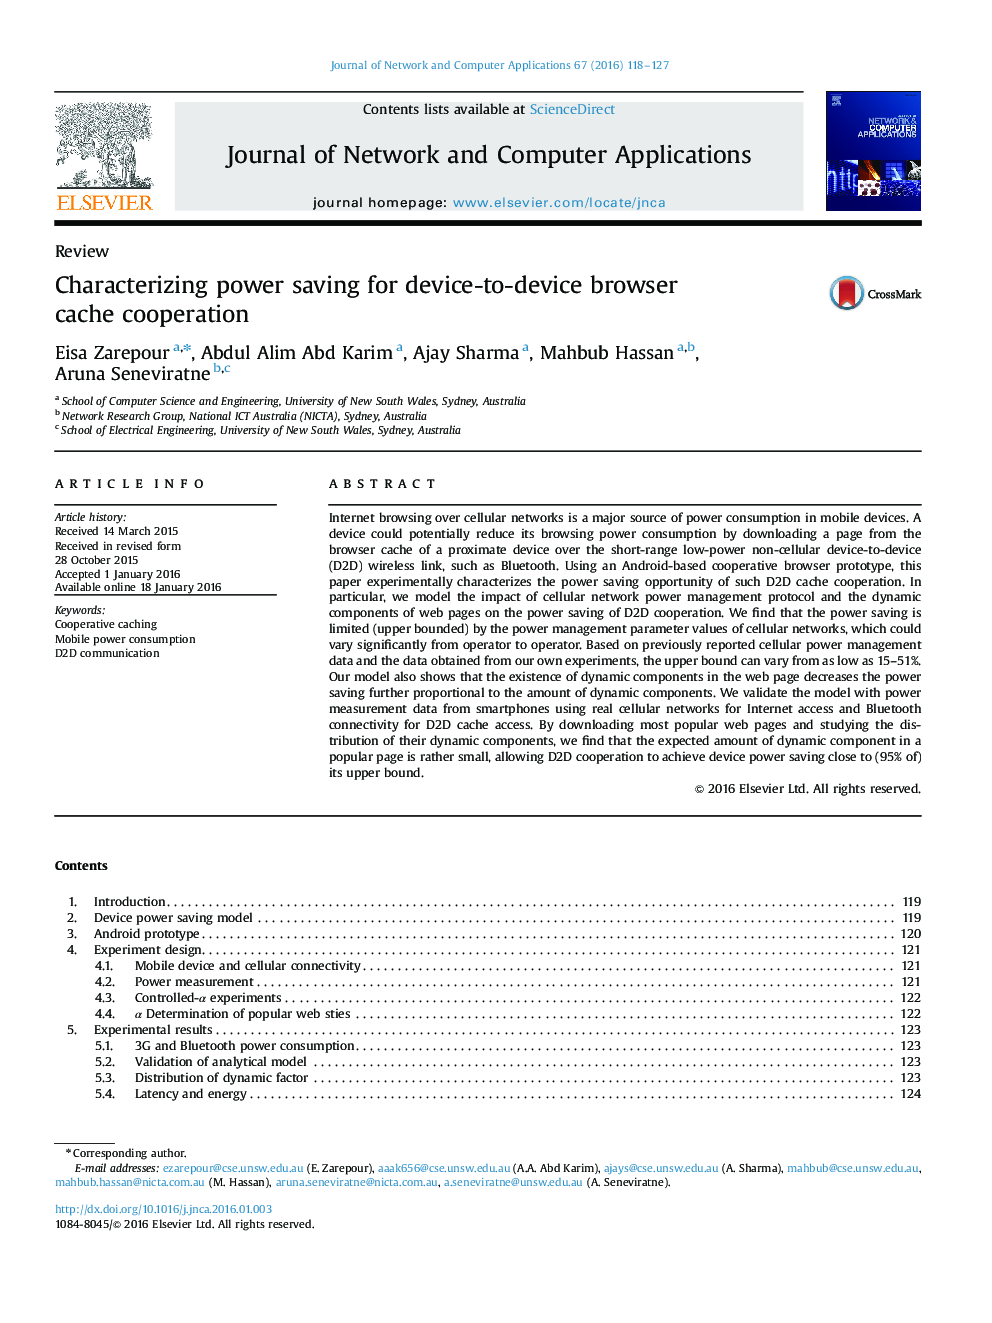 Characterizing power saving for device-to-device browser cache cooperation